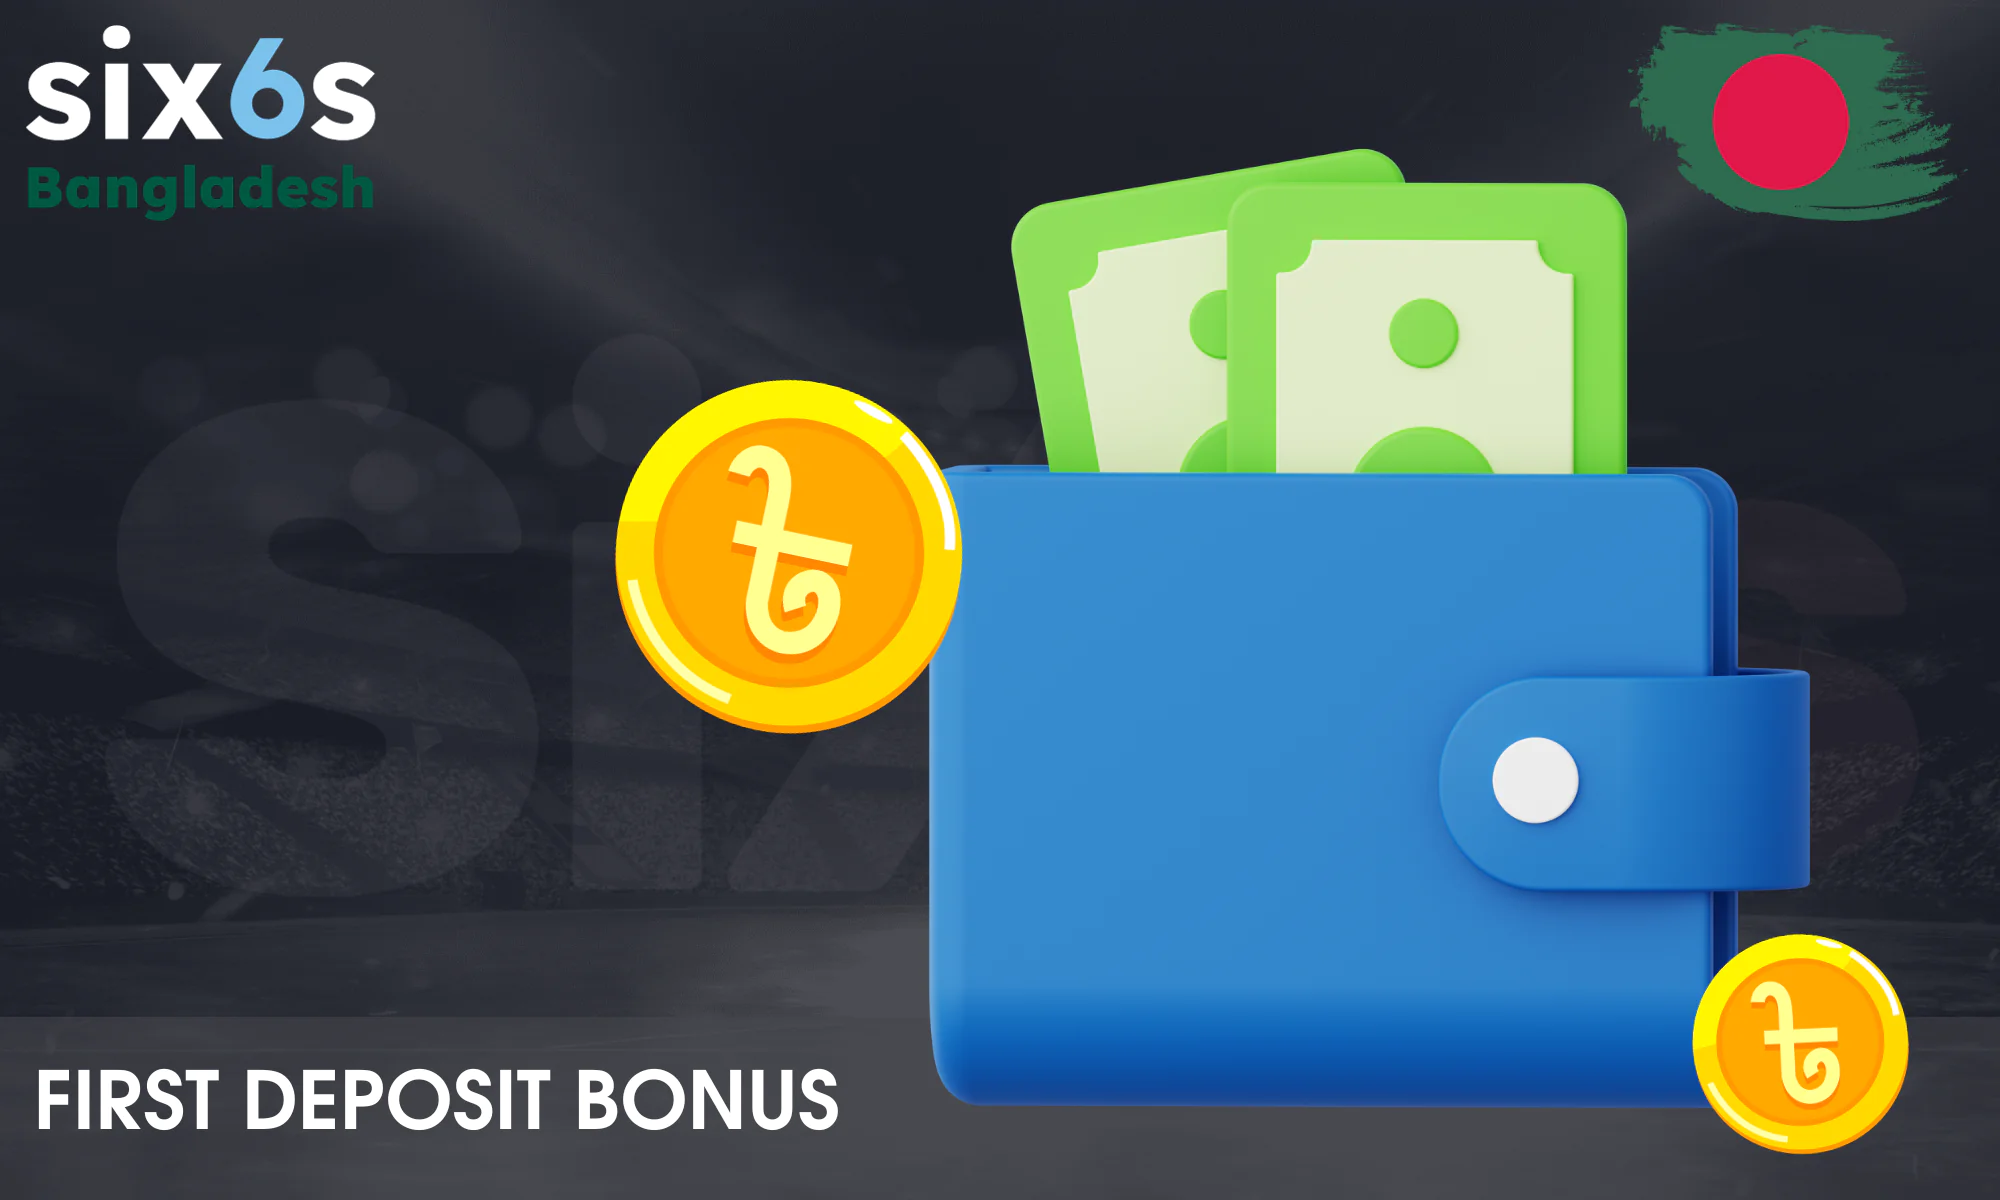 Opportunity to receive a welcome bonus from Six6s